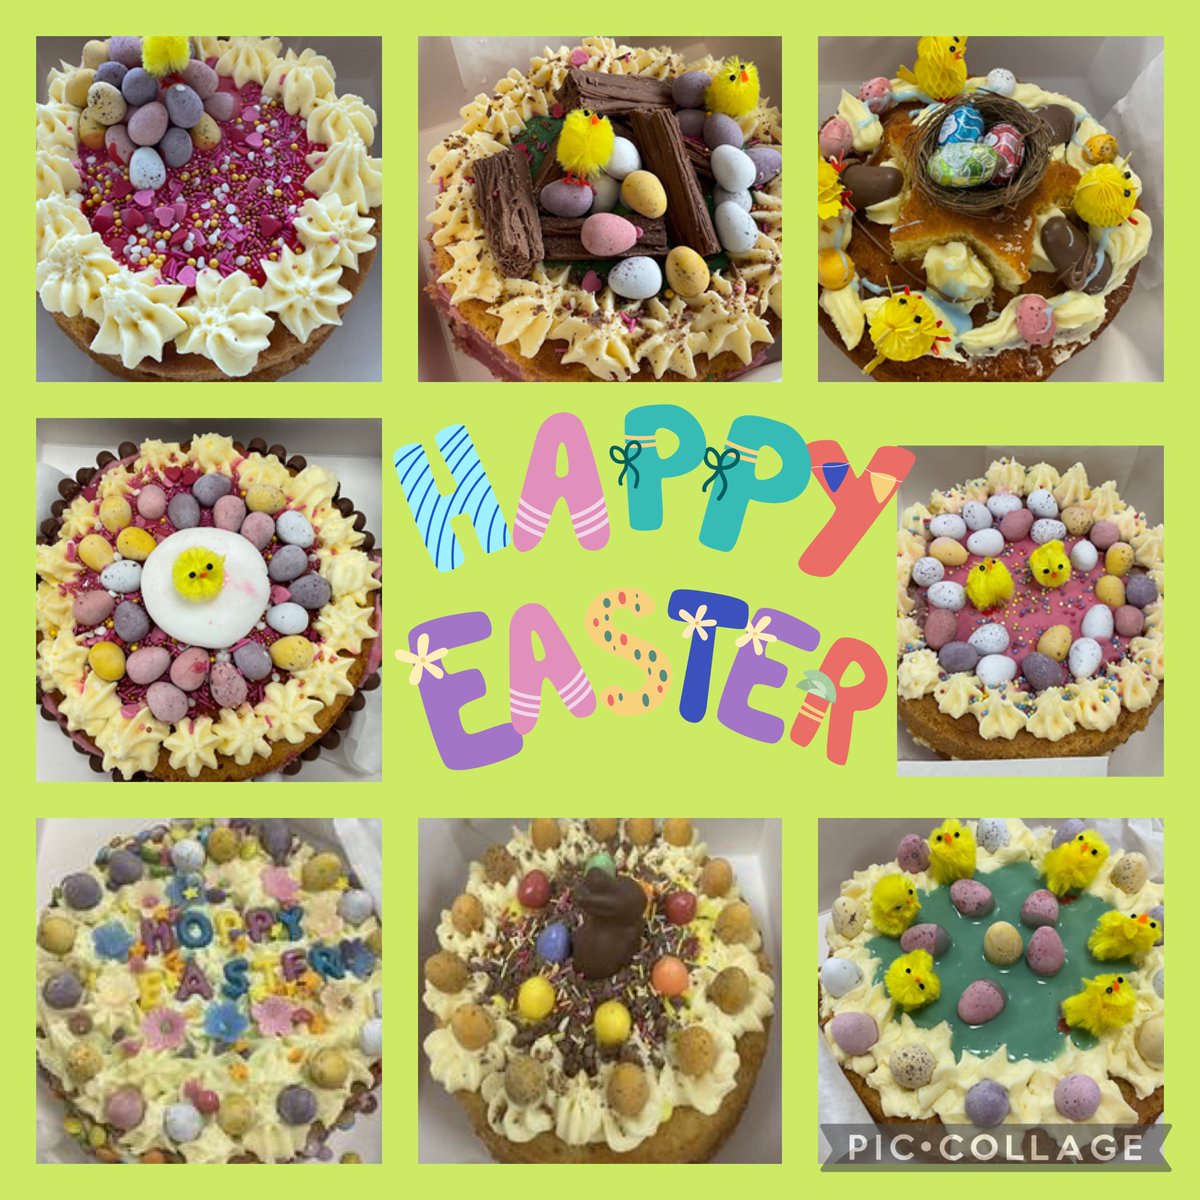 Eggcellent Easter cakes created by year 10 Home Economics classes. Wishing everyone a Happy Easter!